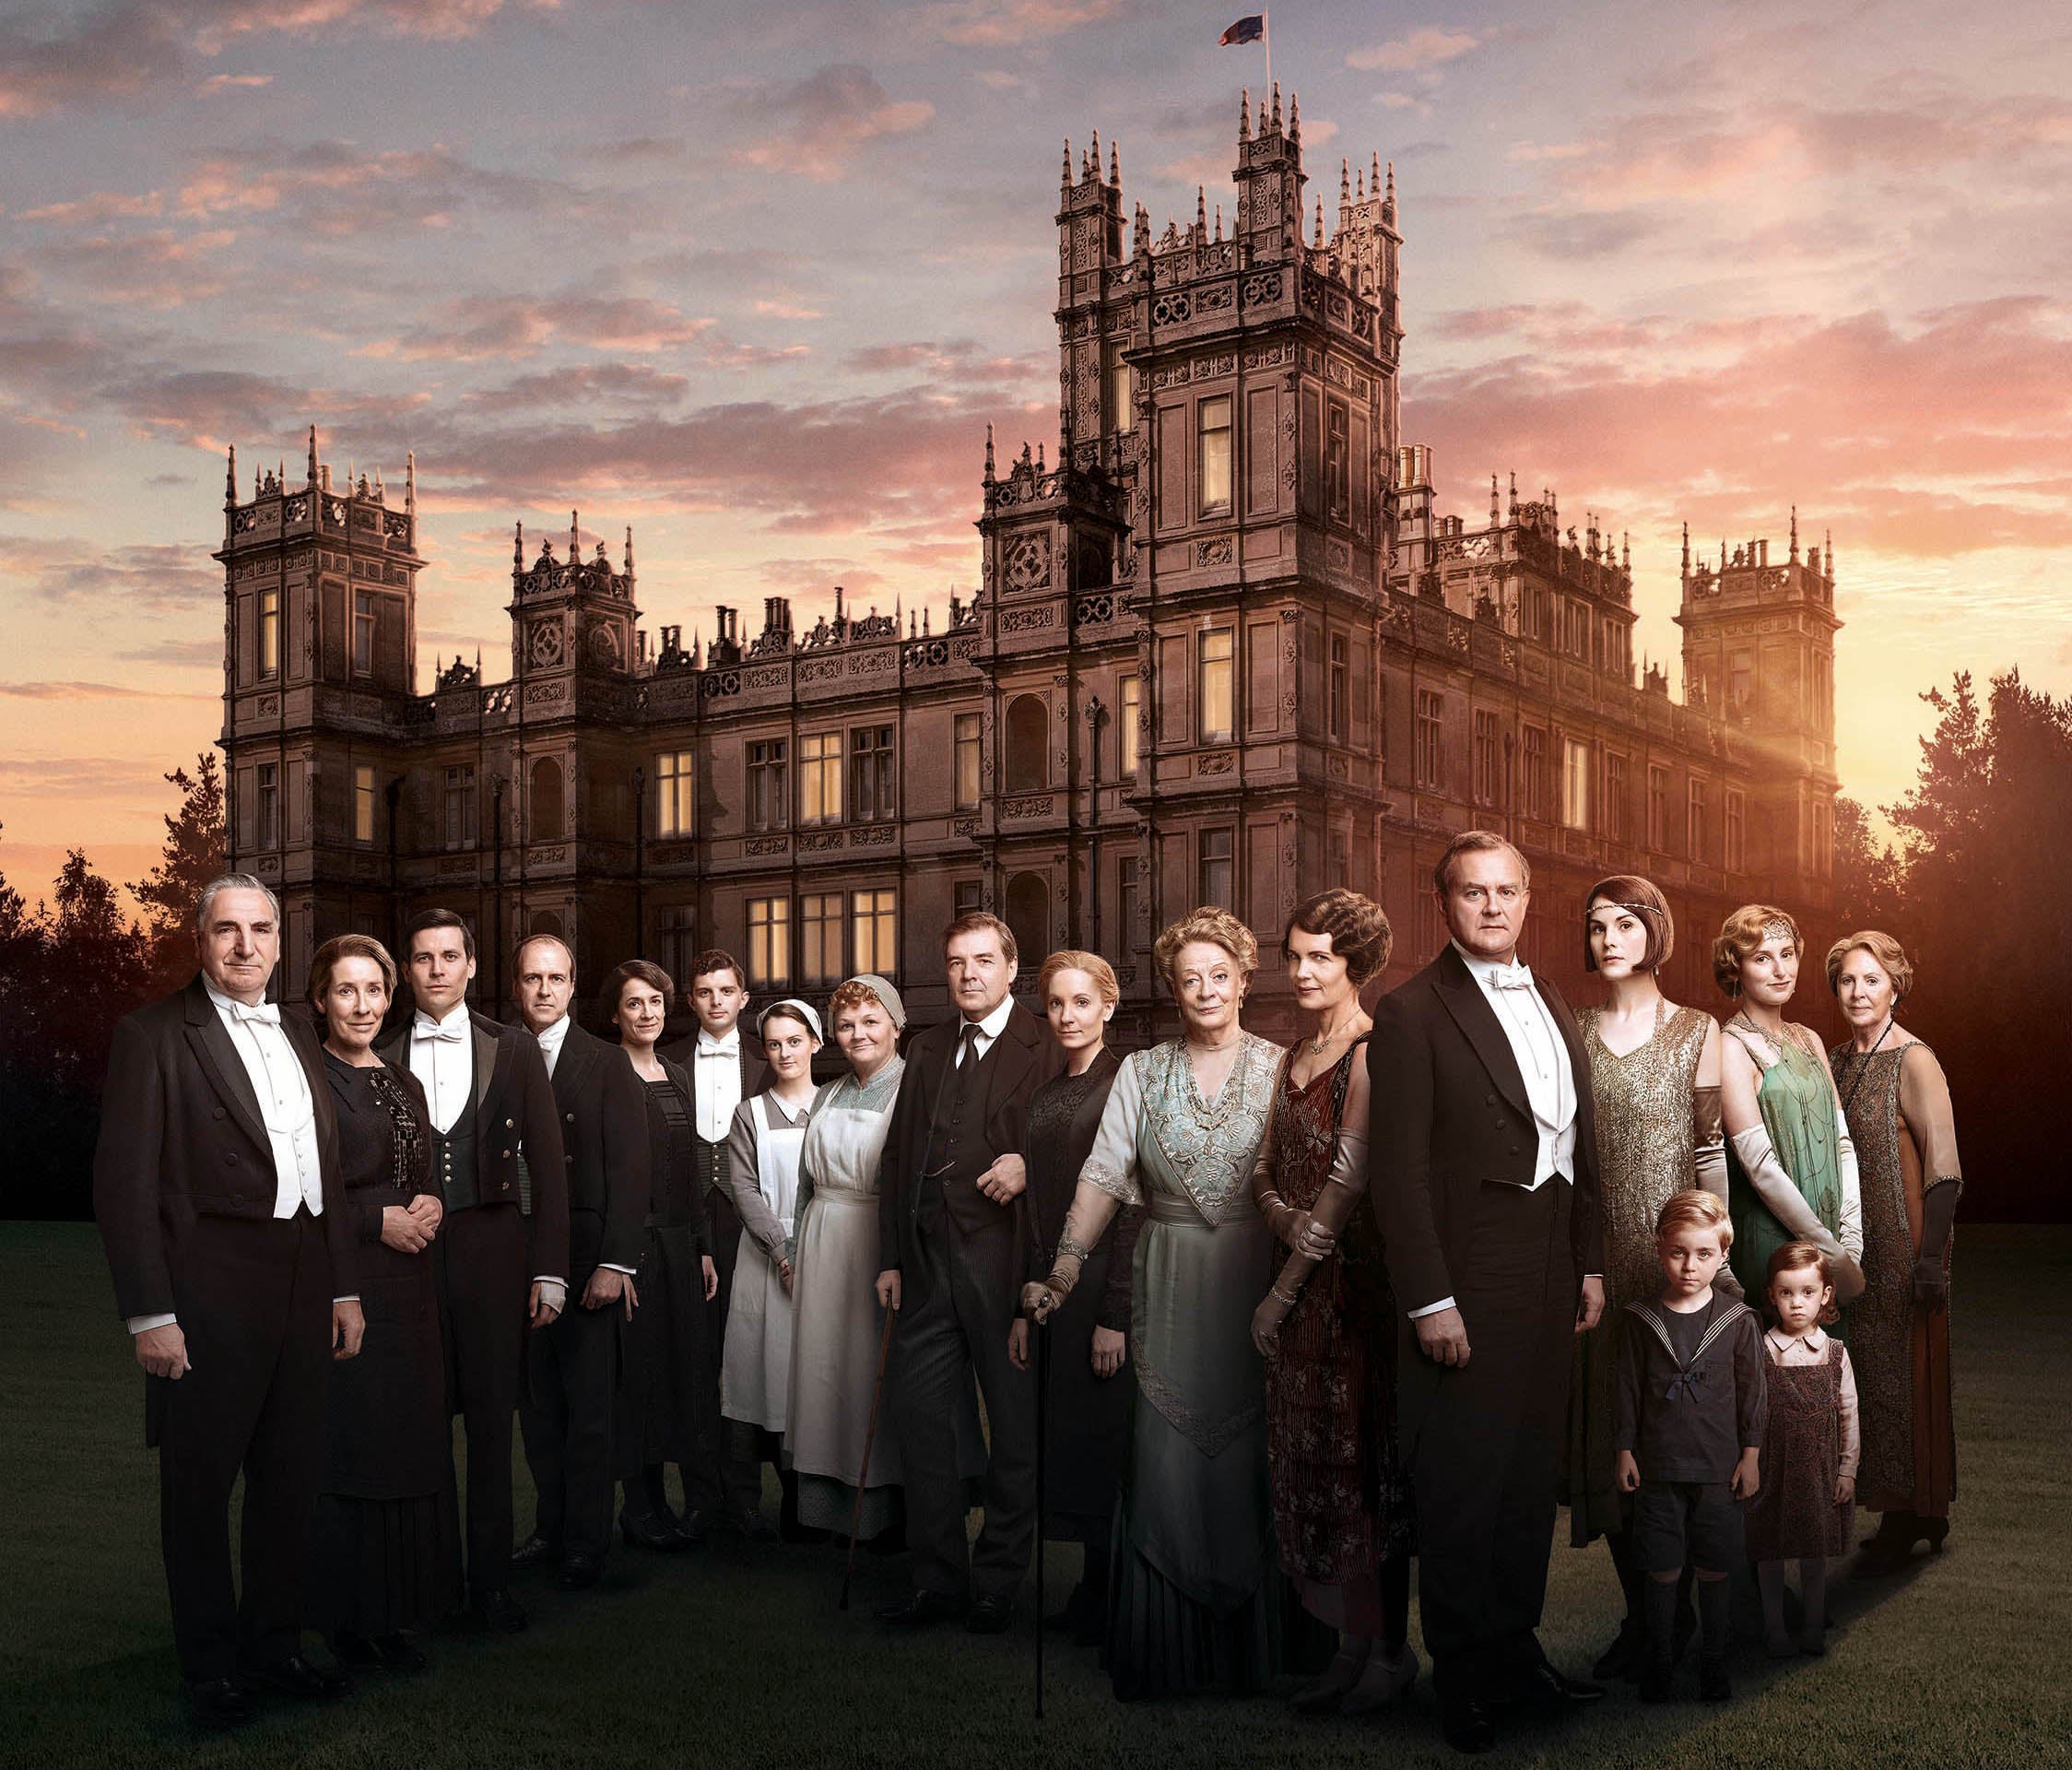 The sun set on the final series of Downton Abbey